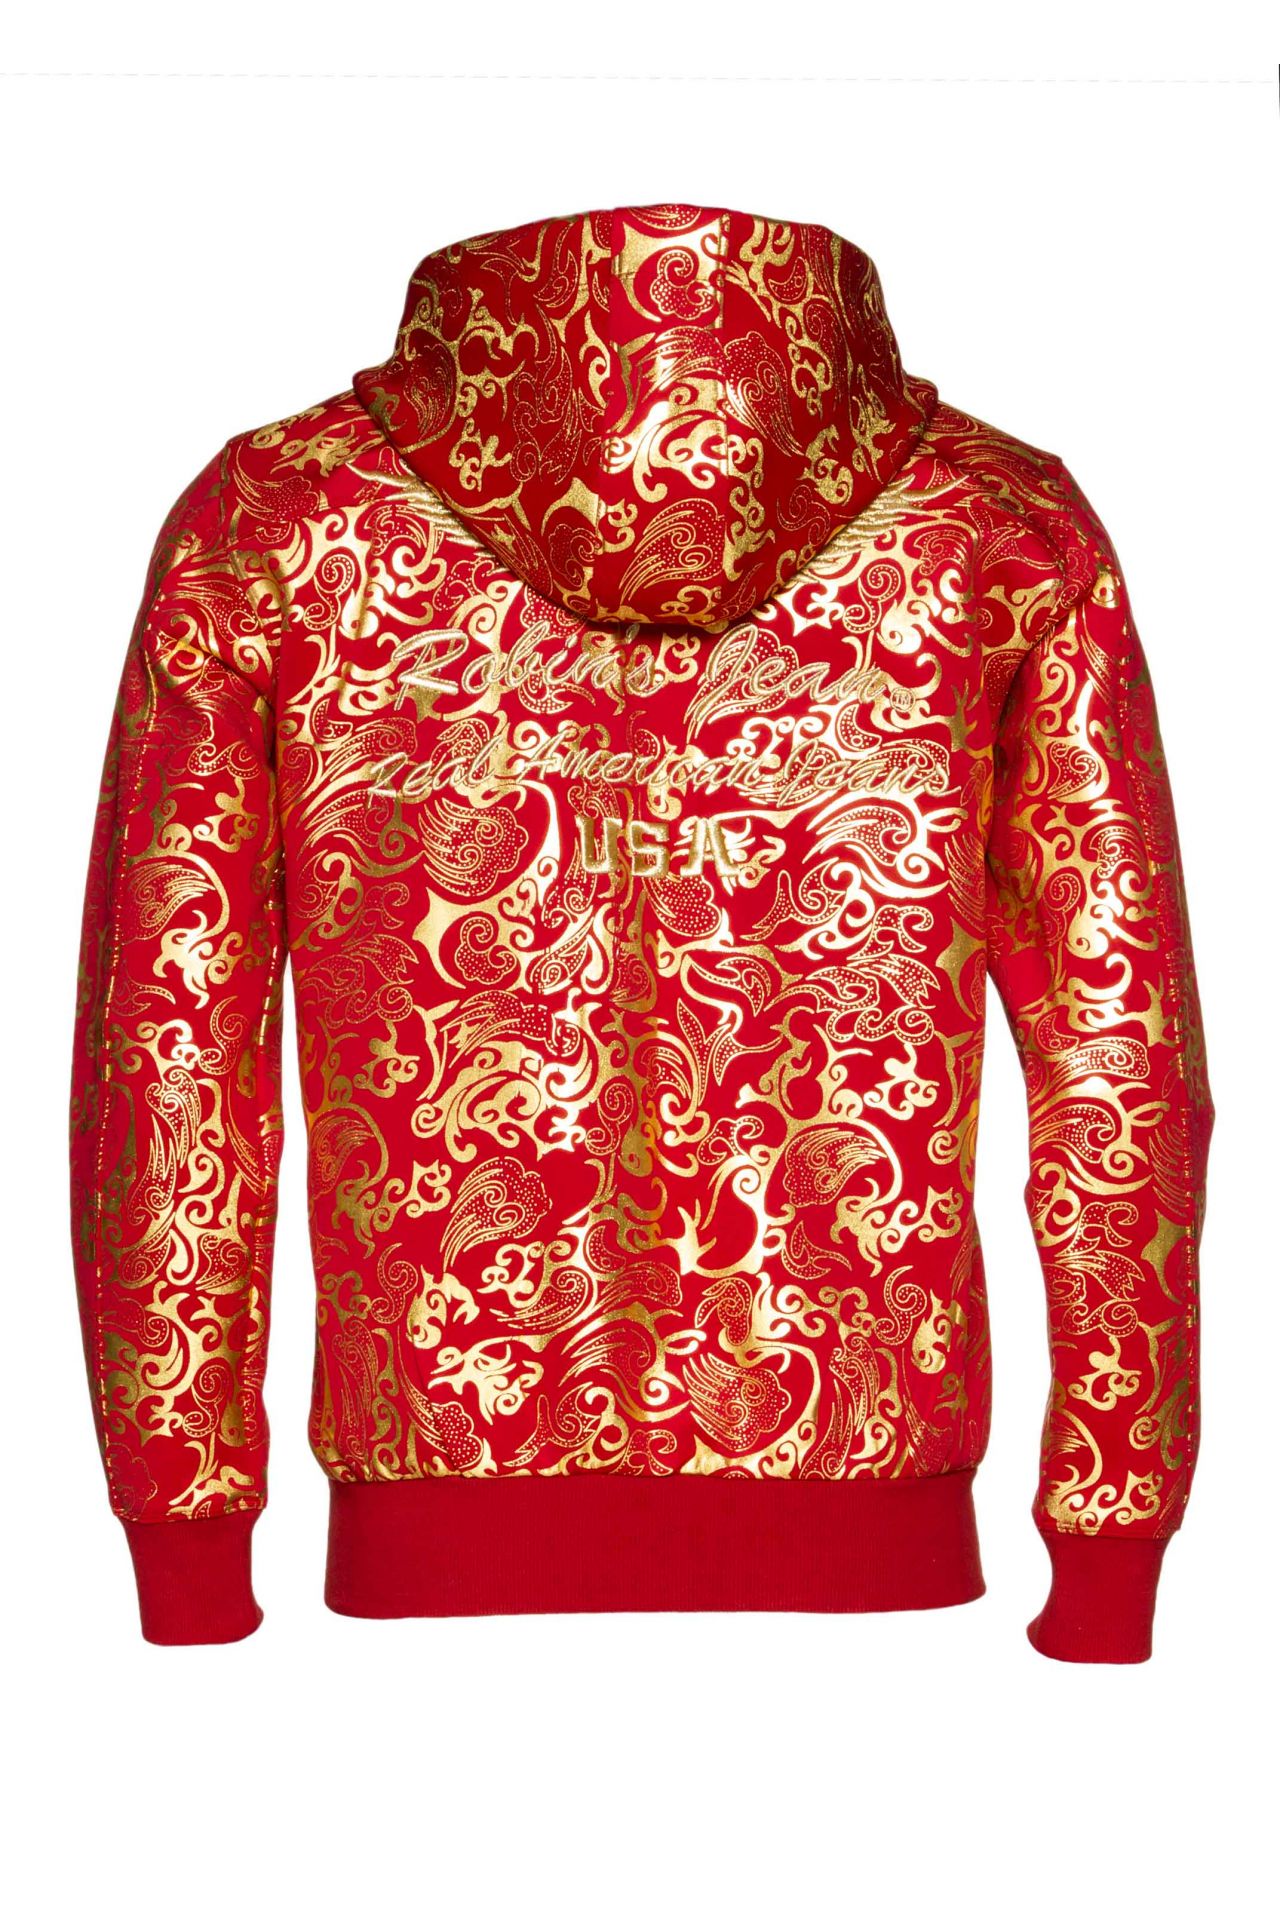 CLOUDS TRACK JACKET HOODIE IN RED AND GOLD